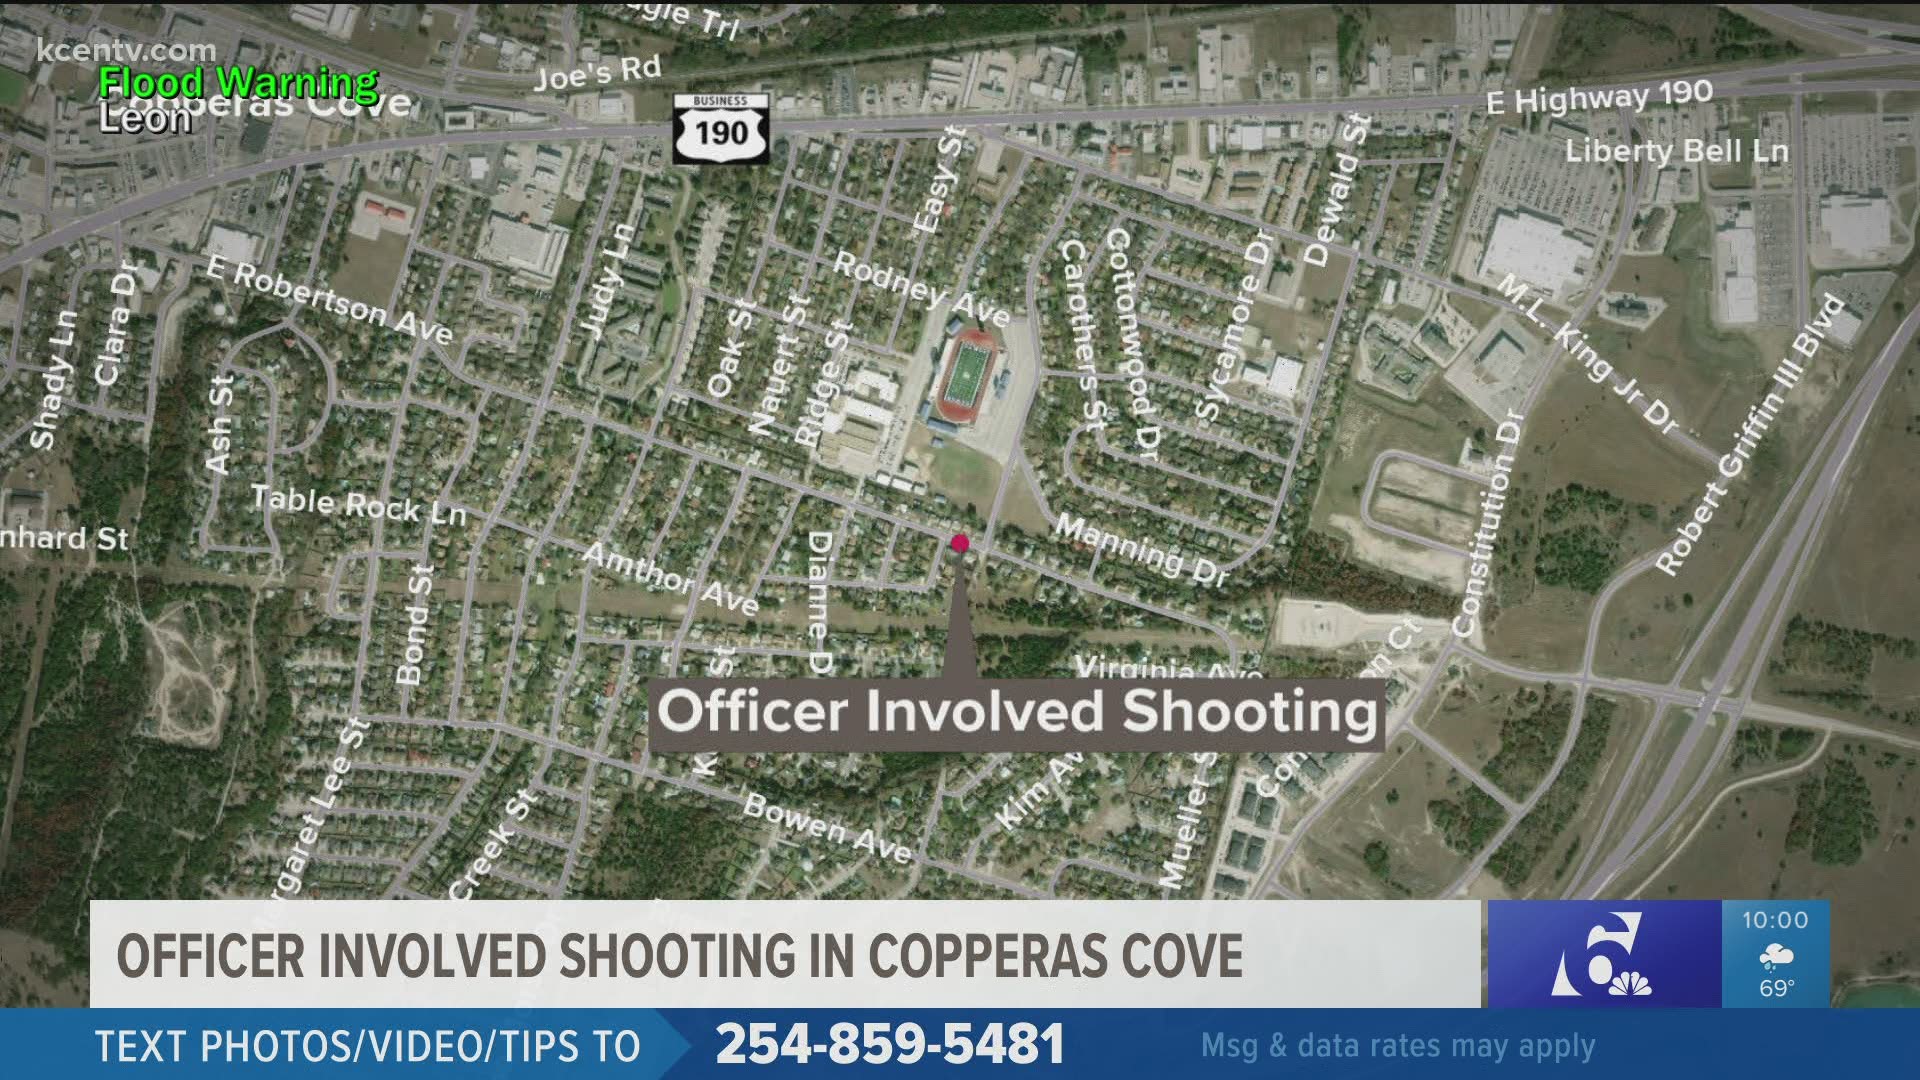 An off-duty Copperas Cove police officer was involved in a shooting leaving one woman with non-life-threatening gunshot wounds.